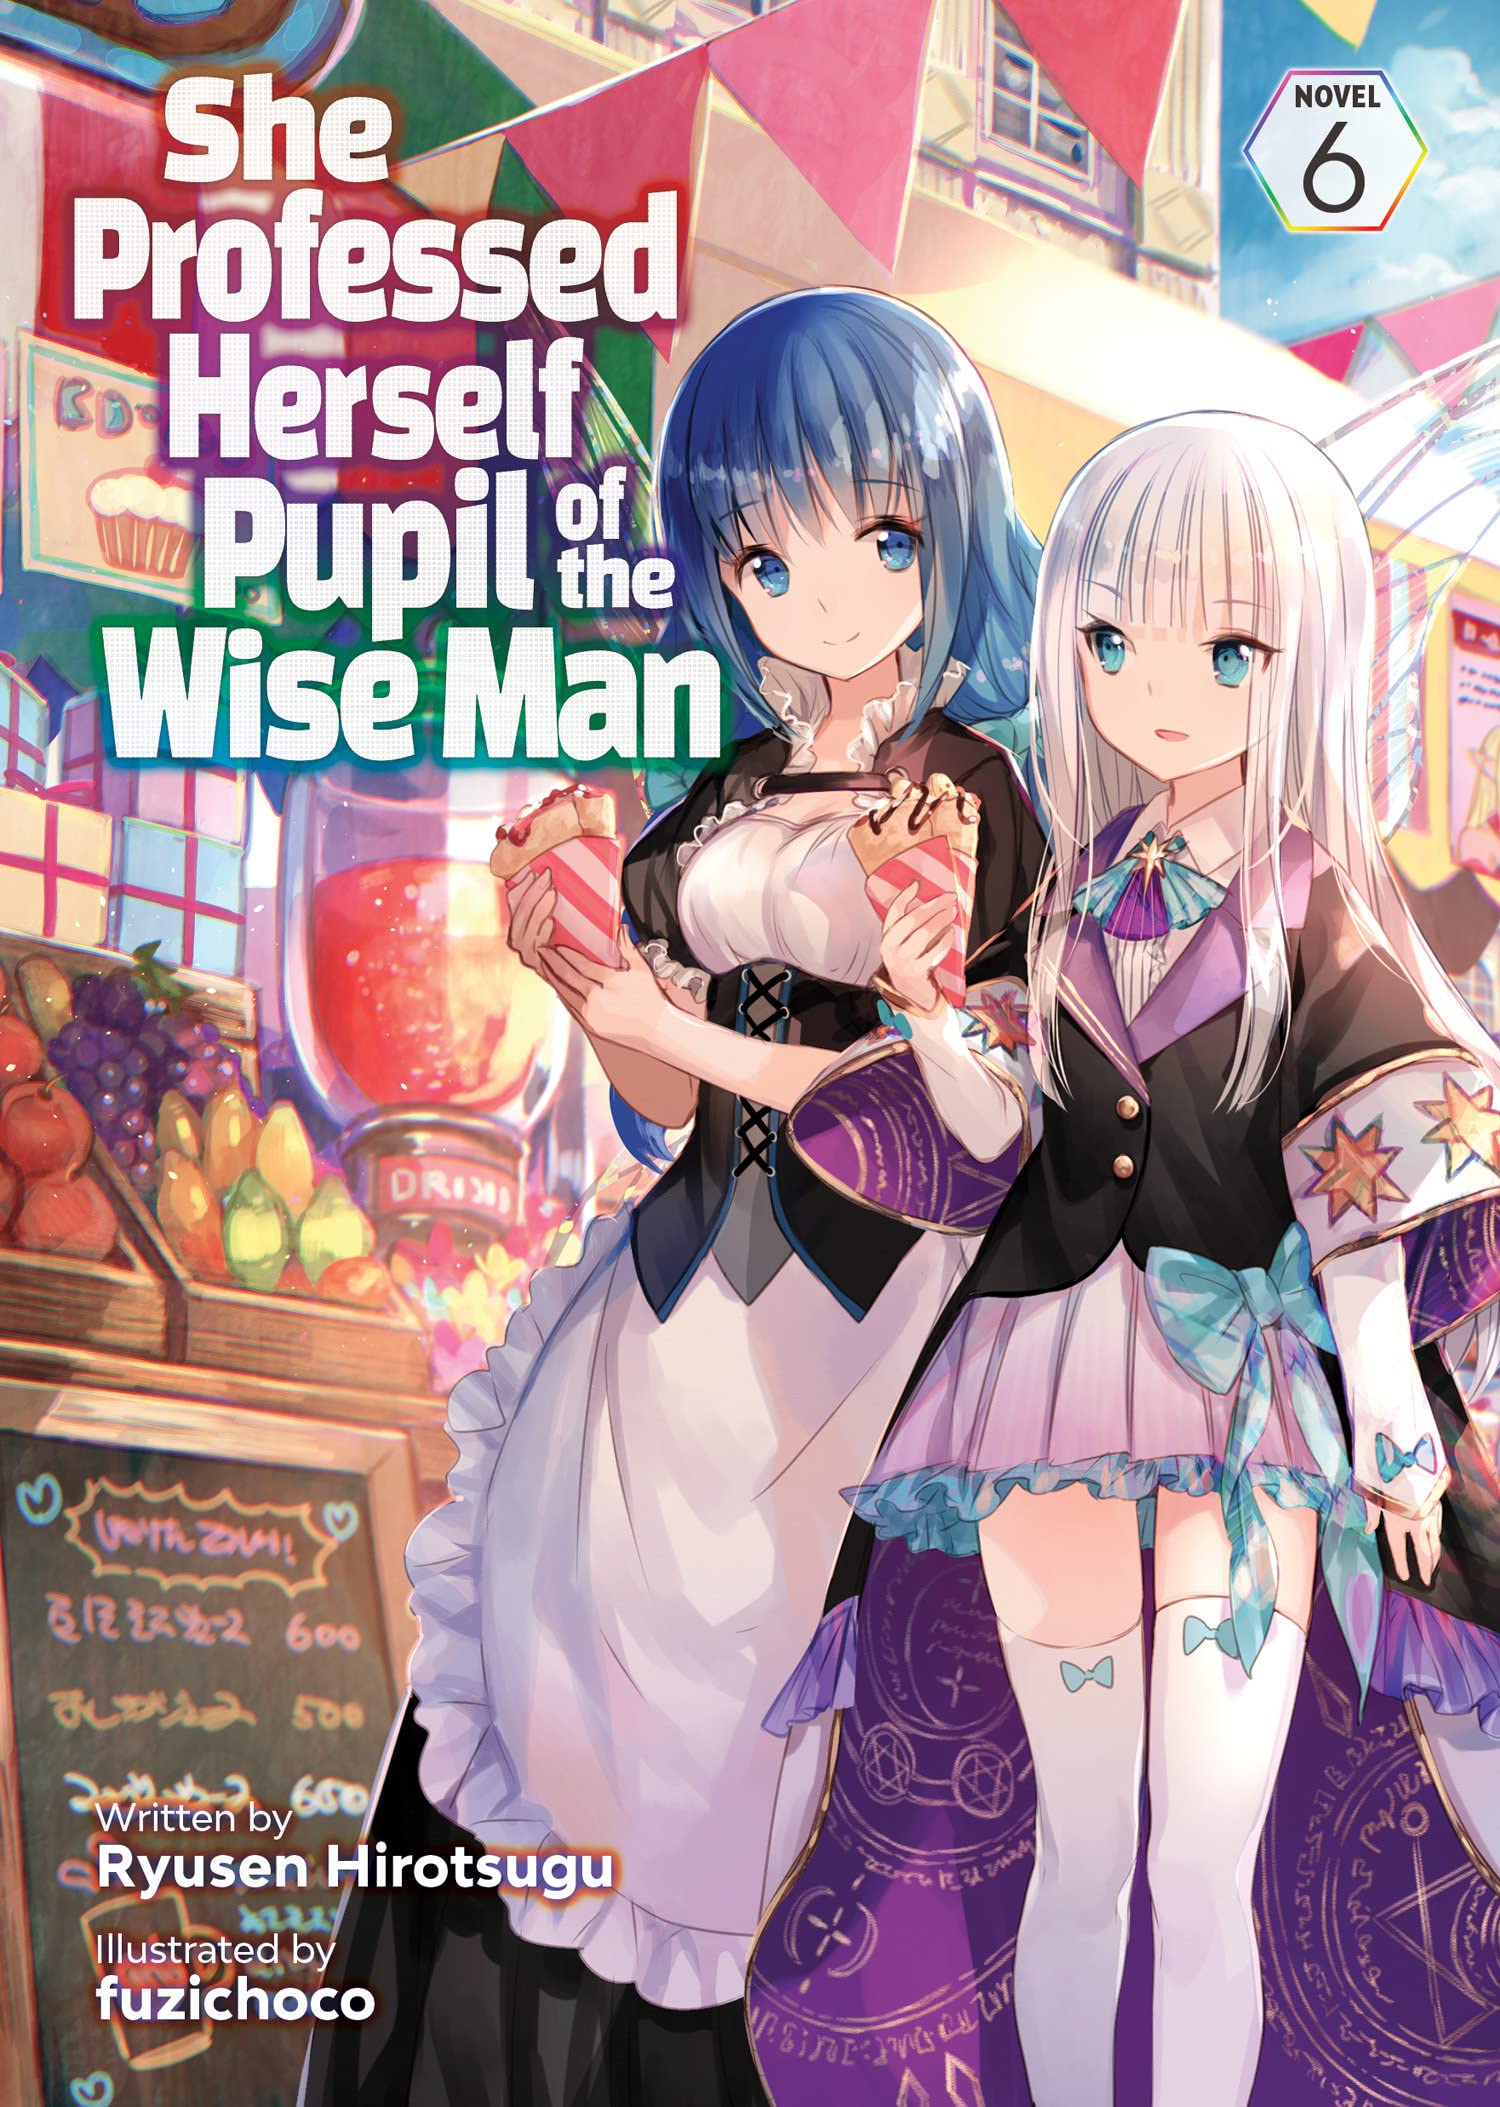 She Professed Herself Pupil of the Wise Man (Light Novel) Vol. 06